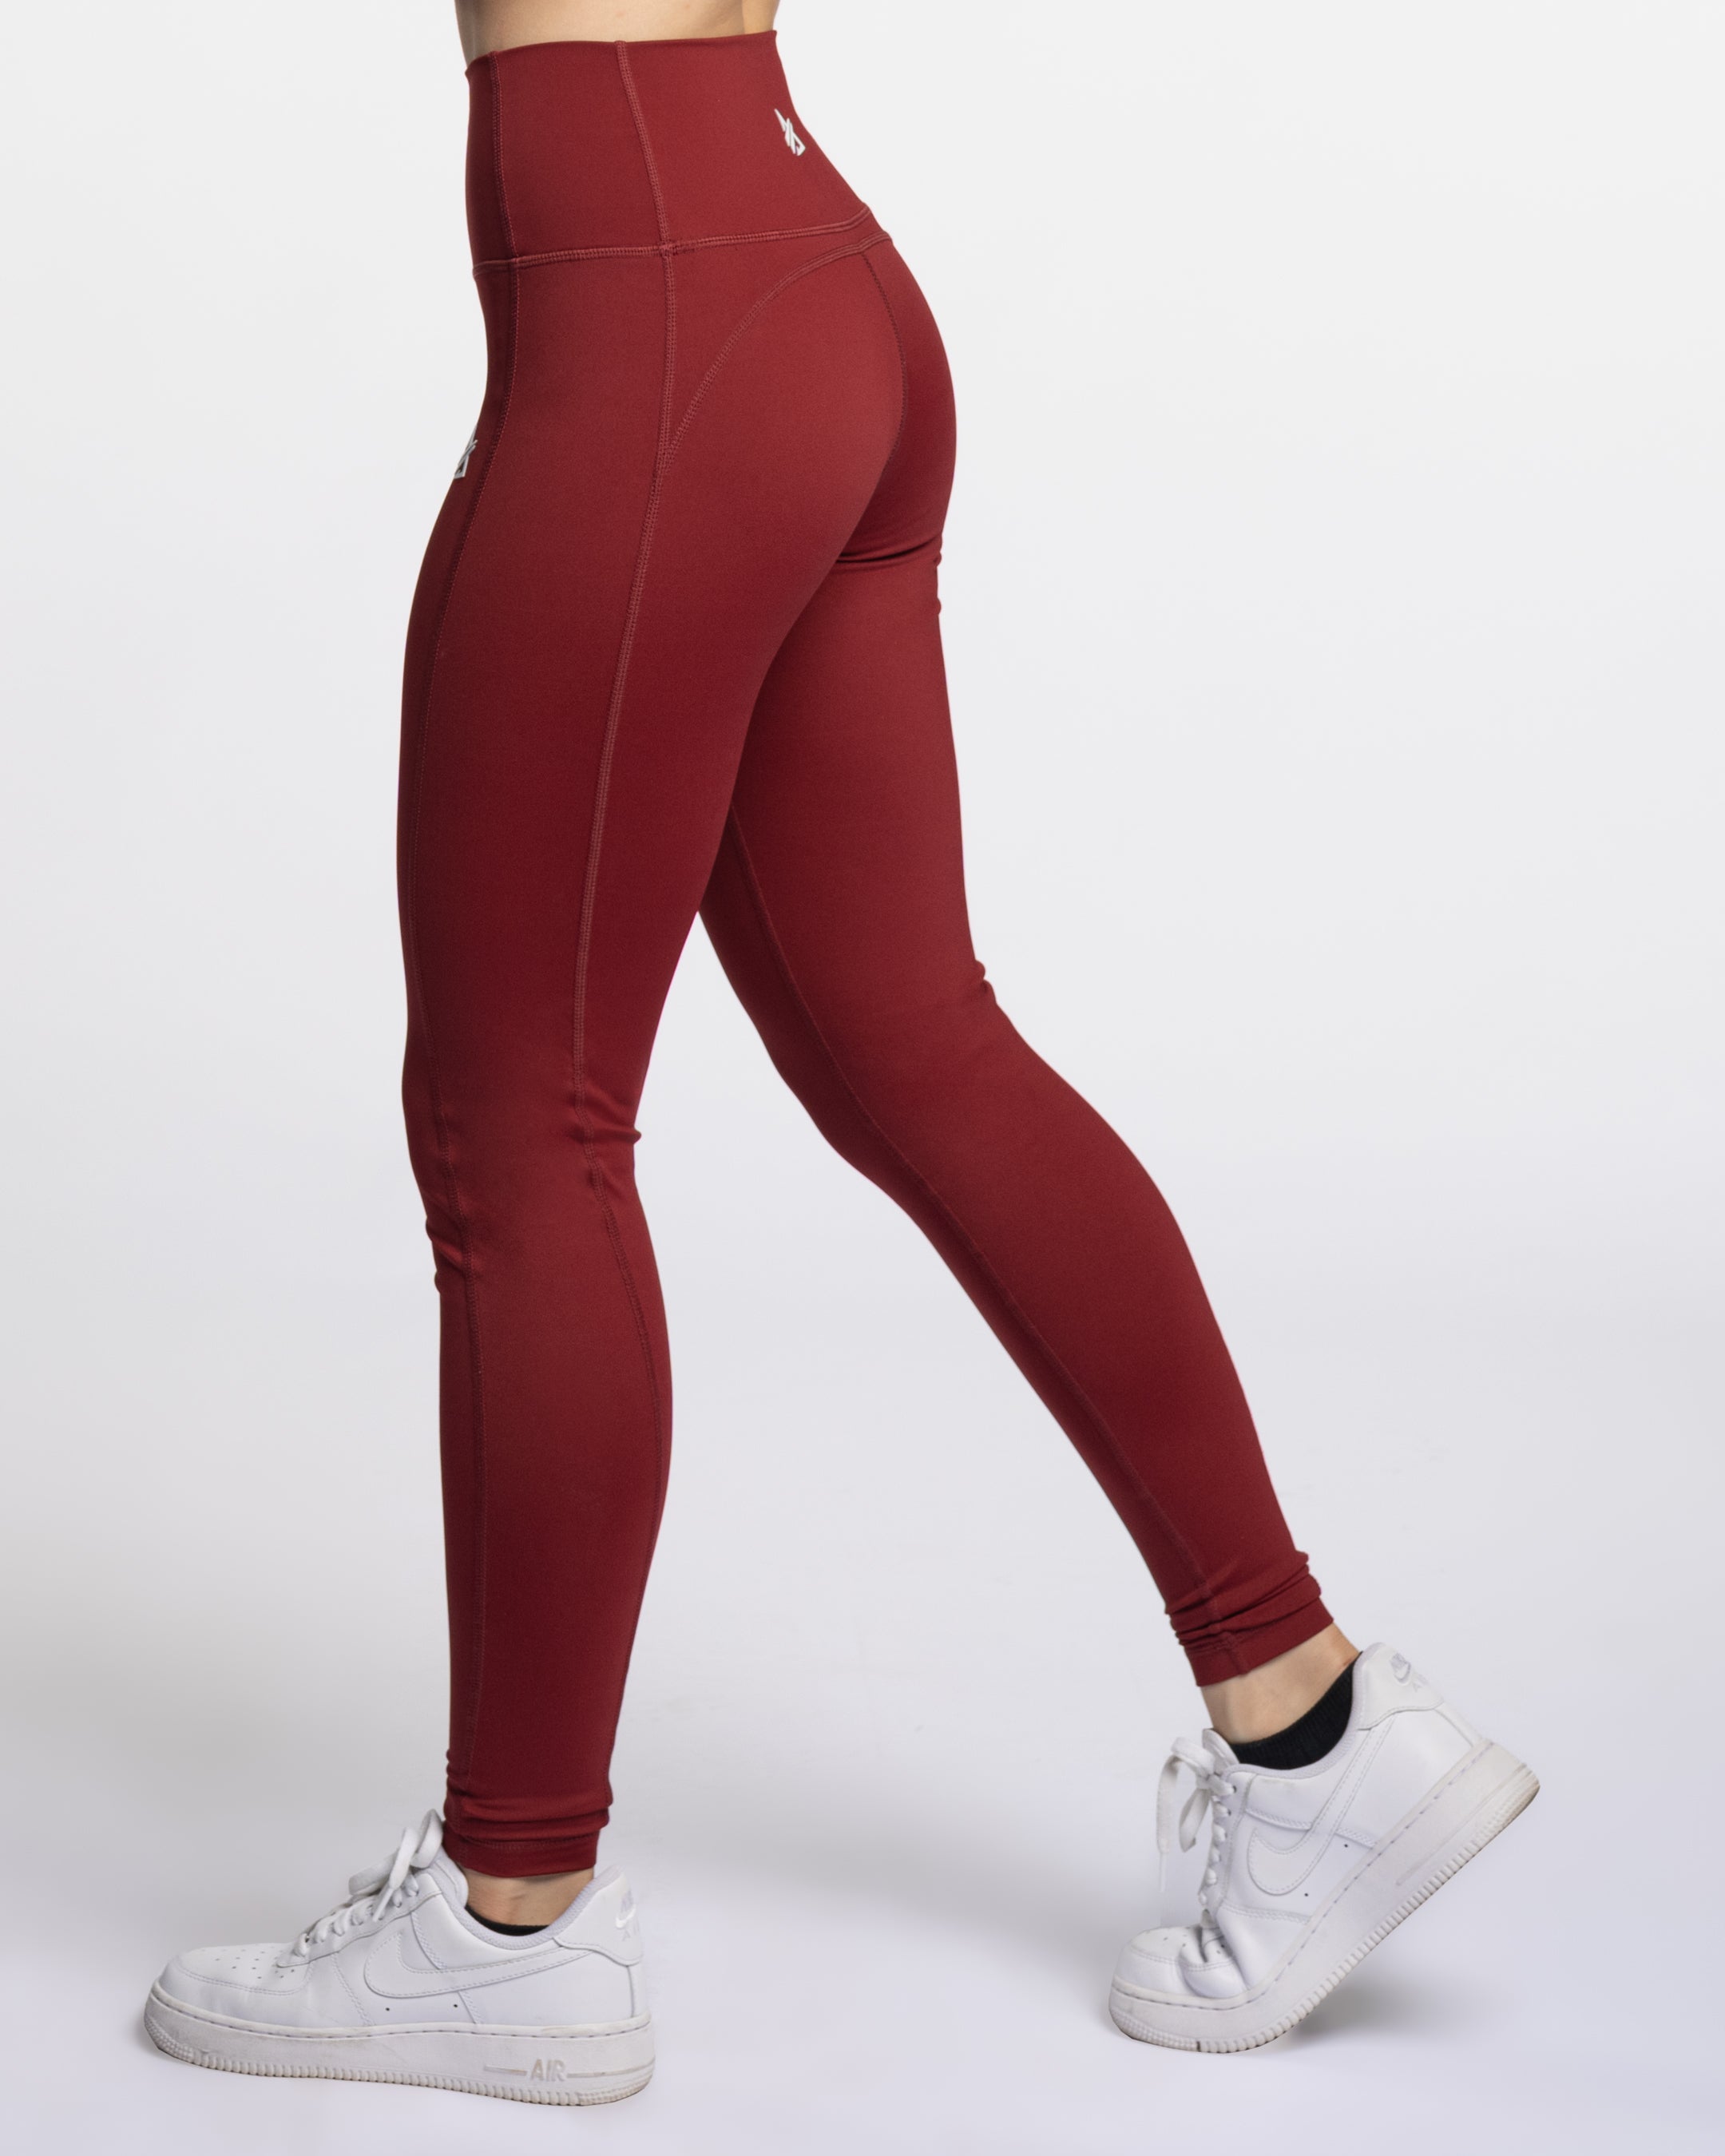 Buff Bunny Leggings Red Size XL - $40 (45% Off Retail) New With Tags - From  Abby